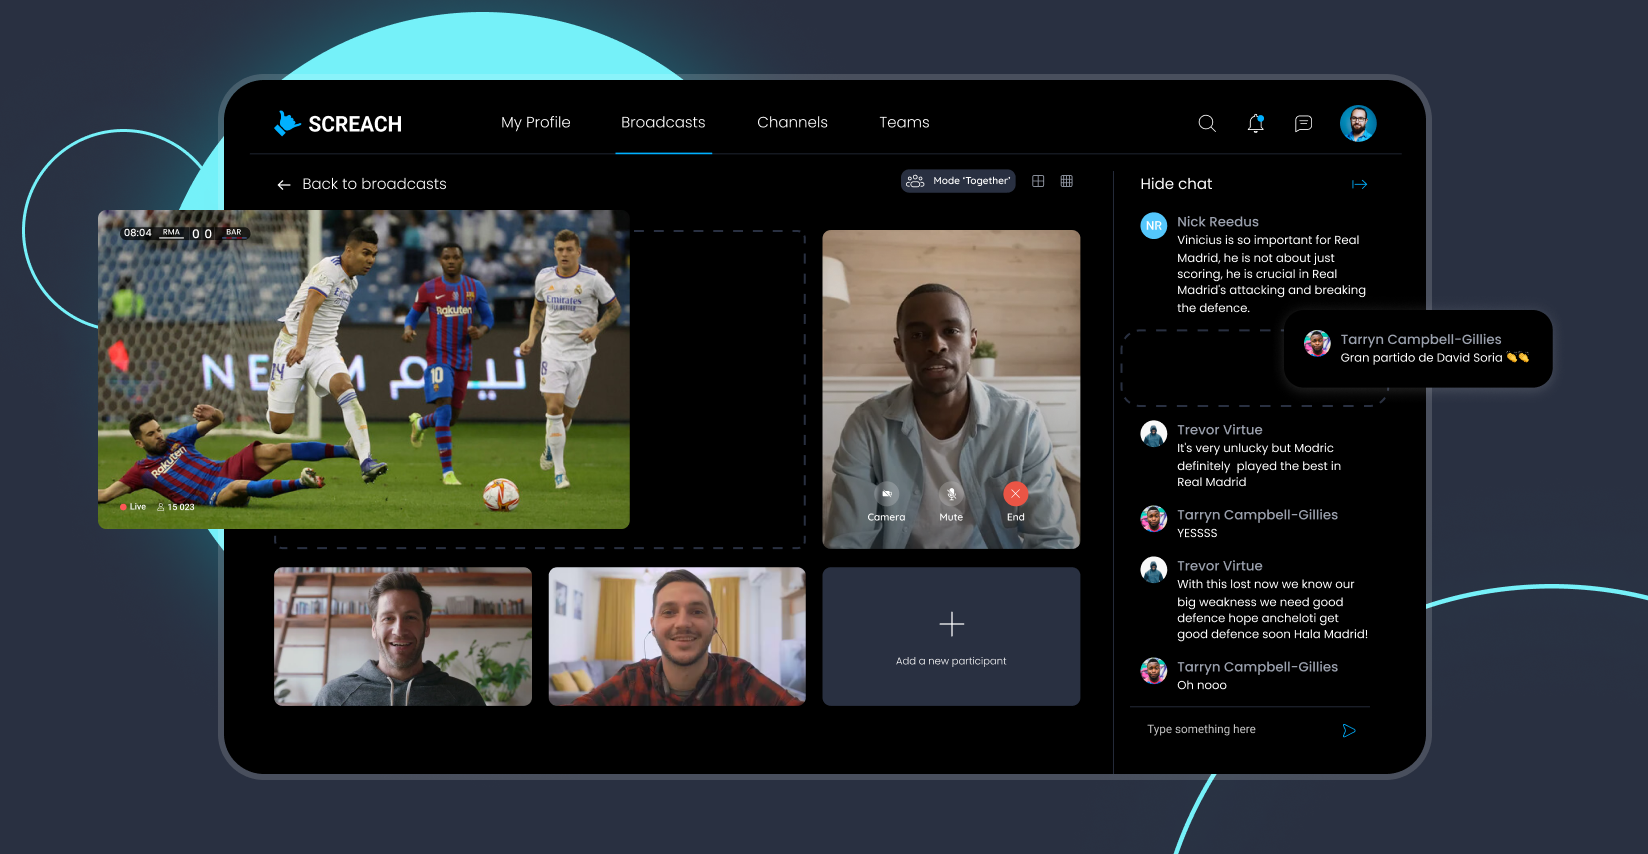 Creating an app for streaming sports events